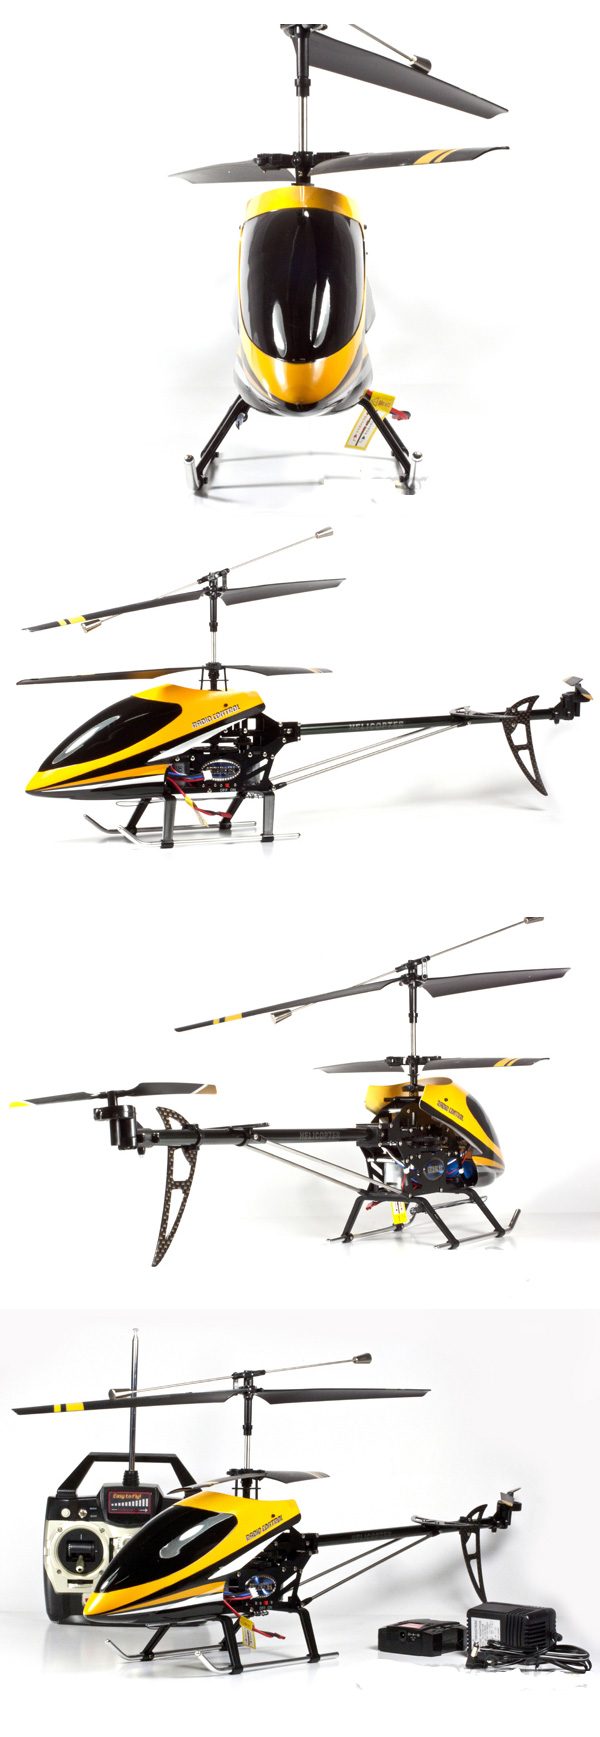 Double Horse 9101- 3CH XL 9101 RC Helicopter